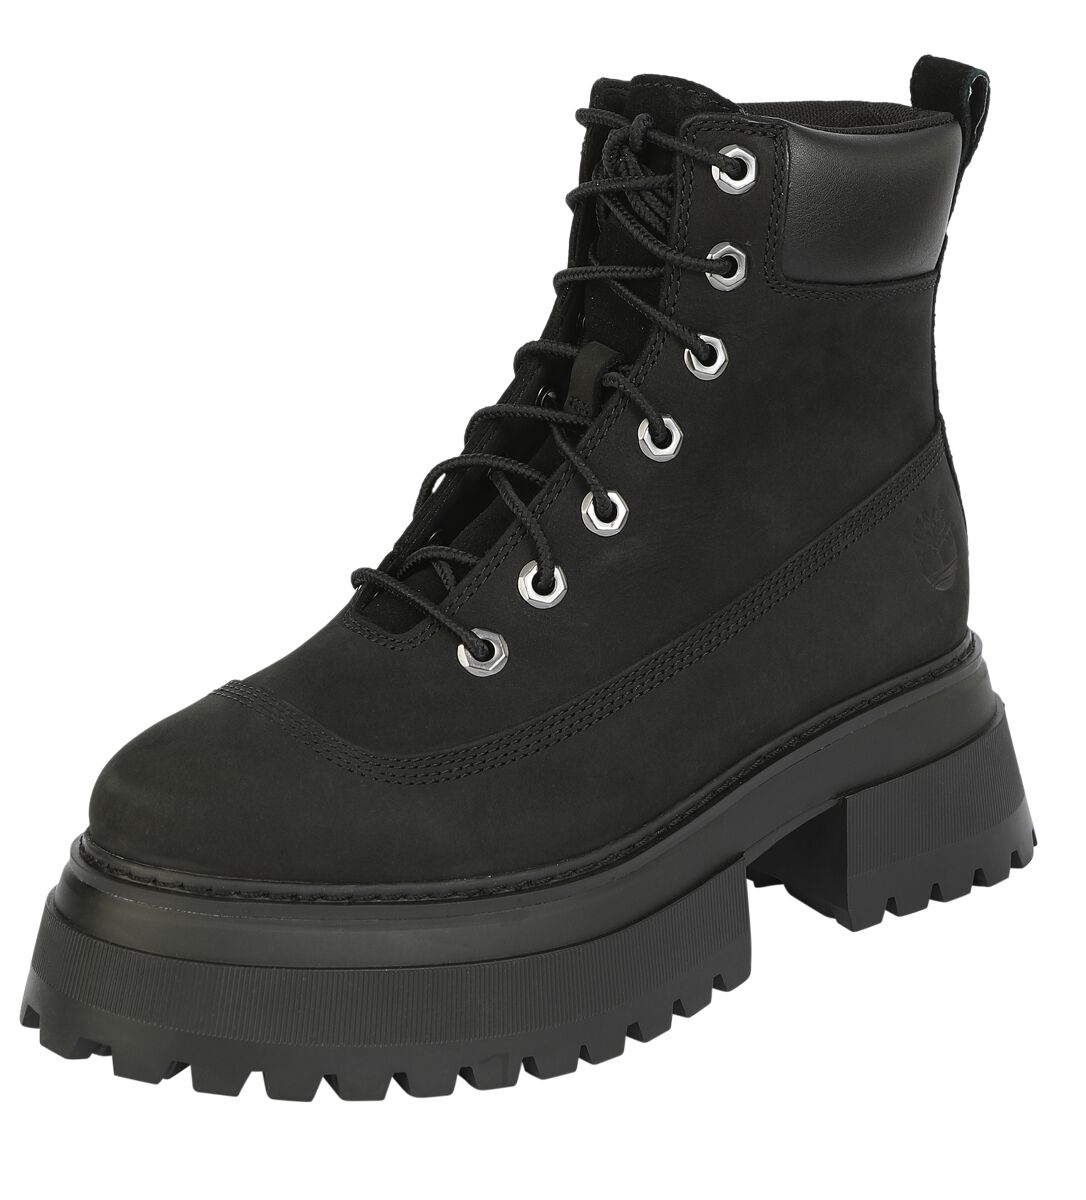 Timberland Sky 6 Inch Lace Up Boot schwarz in EU37